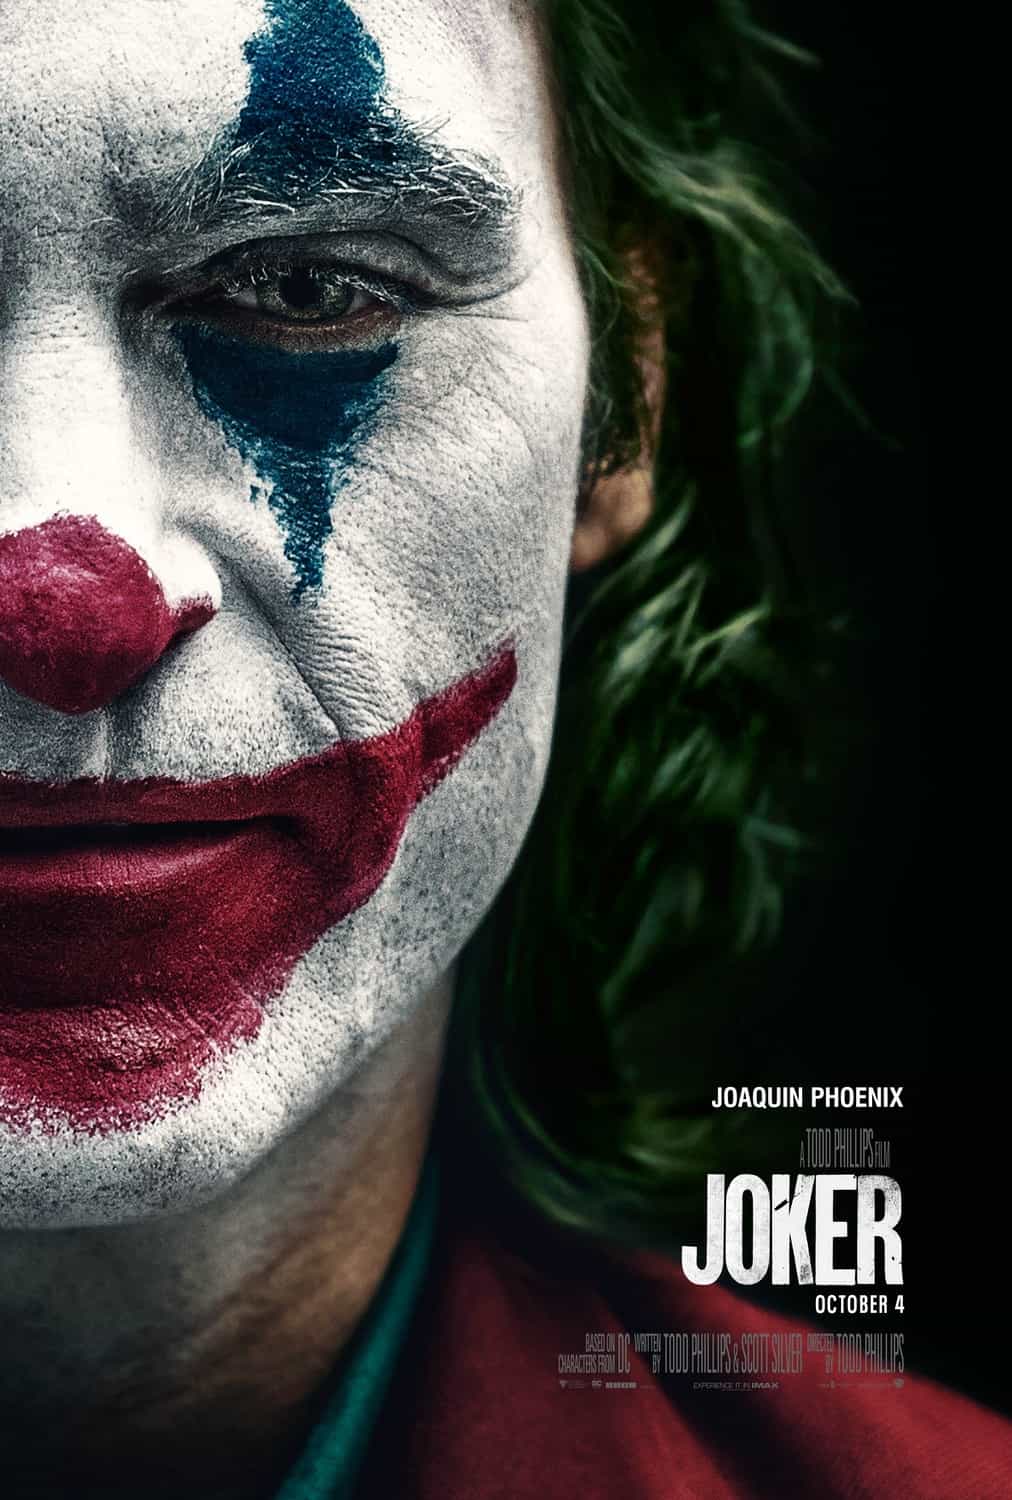 UK Box Office Analysis 8th - 10th November 2019:  A quiet weekend of new films gives Joker a sixth weekend on top, the first movie in ten years to do so